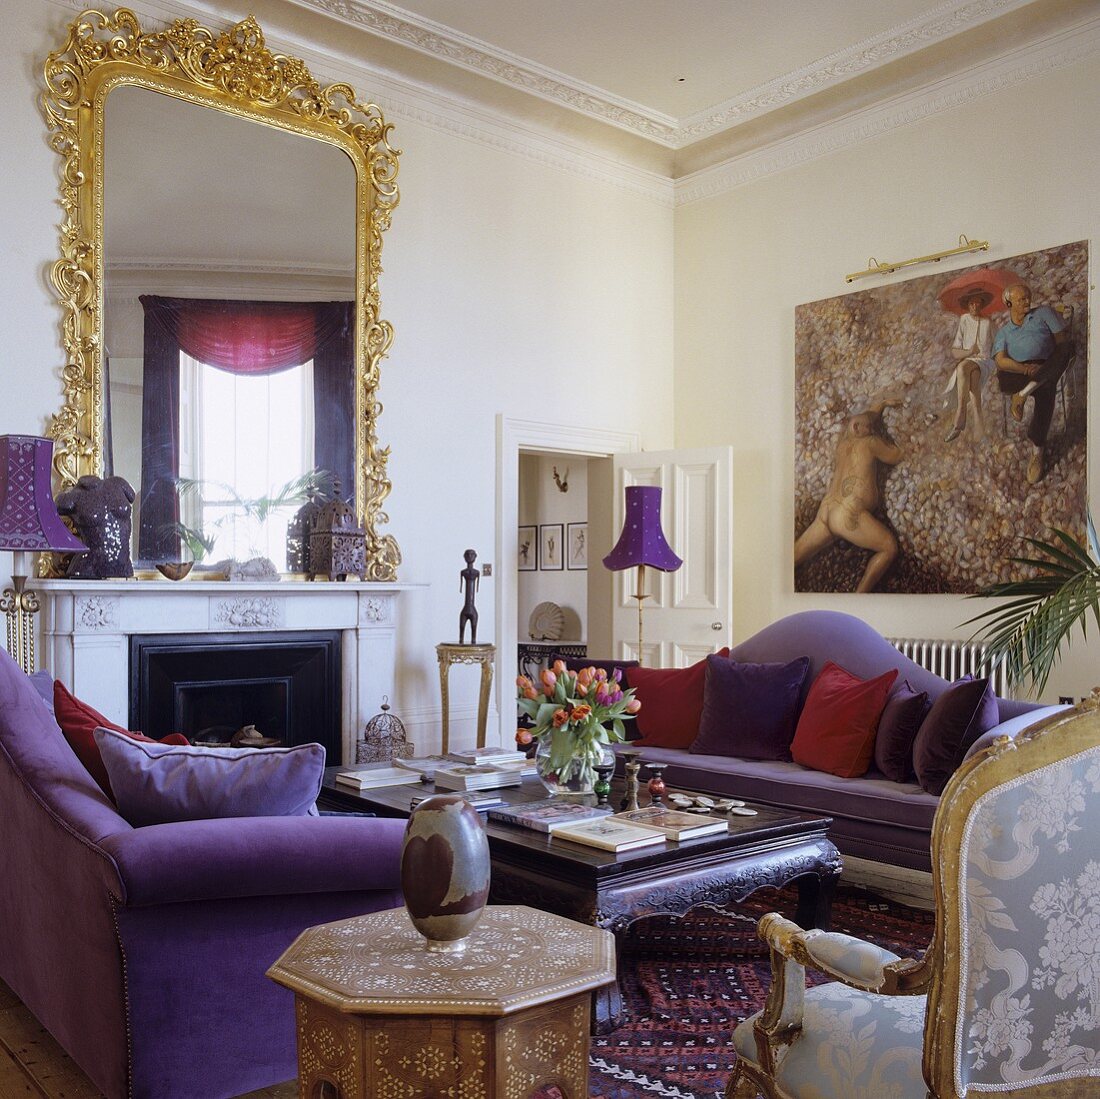 A luxury apartment with purple sofas in front of a fireplace with a Rococo mirror